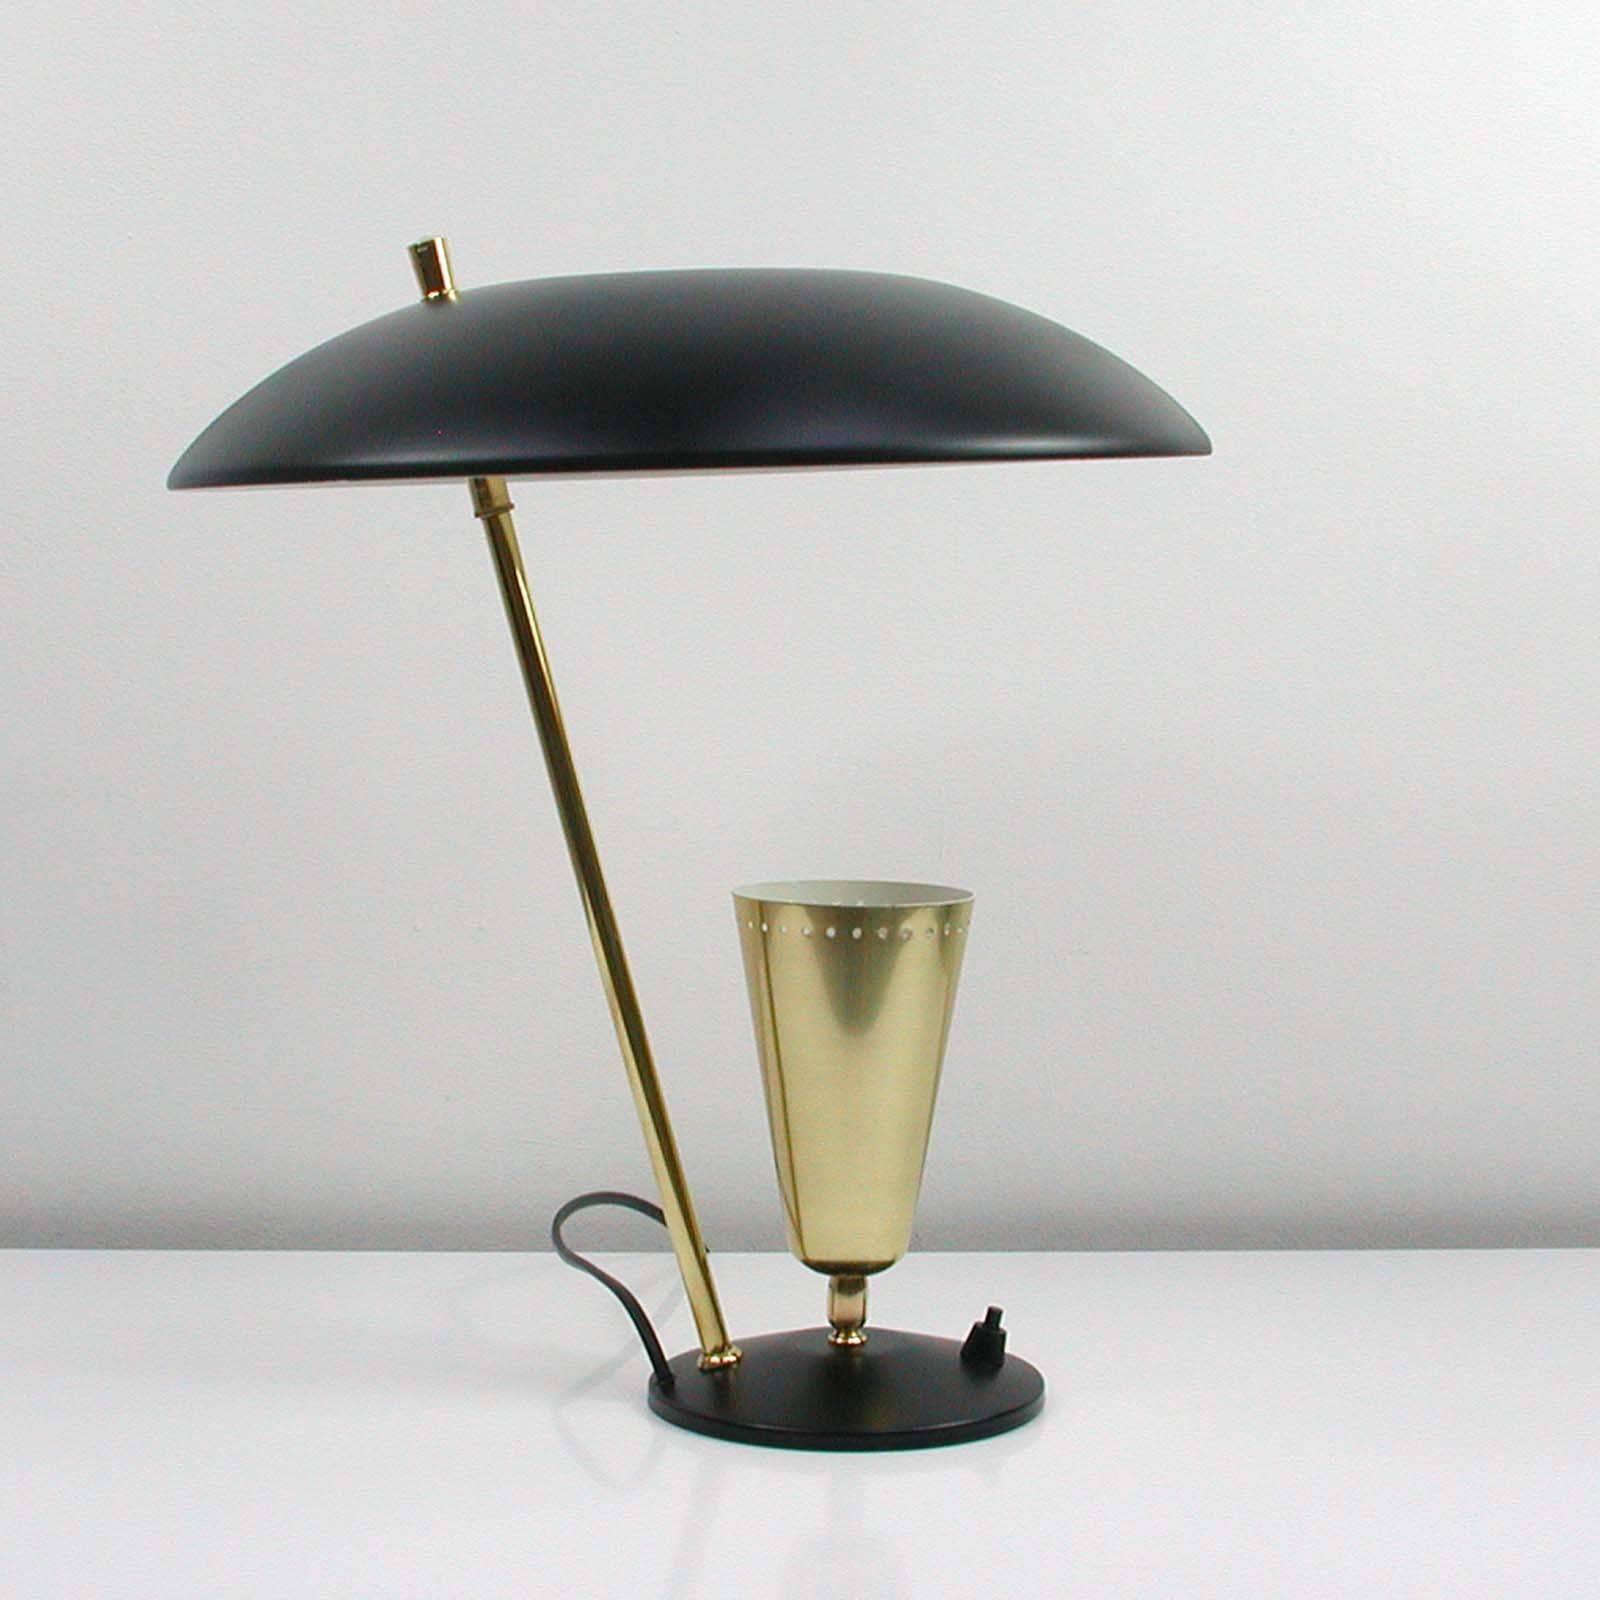 Metal Midcentury French Reflecting Table Lamp by Aluminor, Nice, 1950s